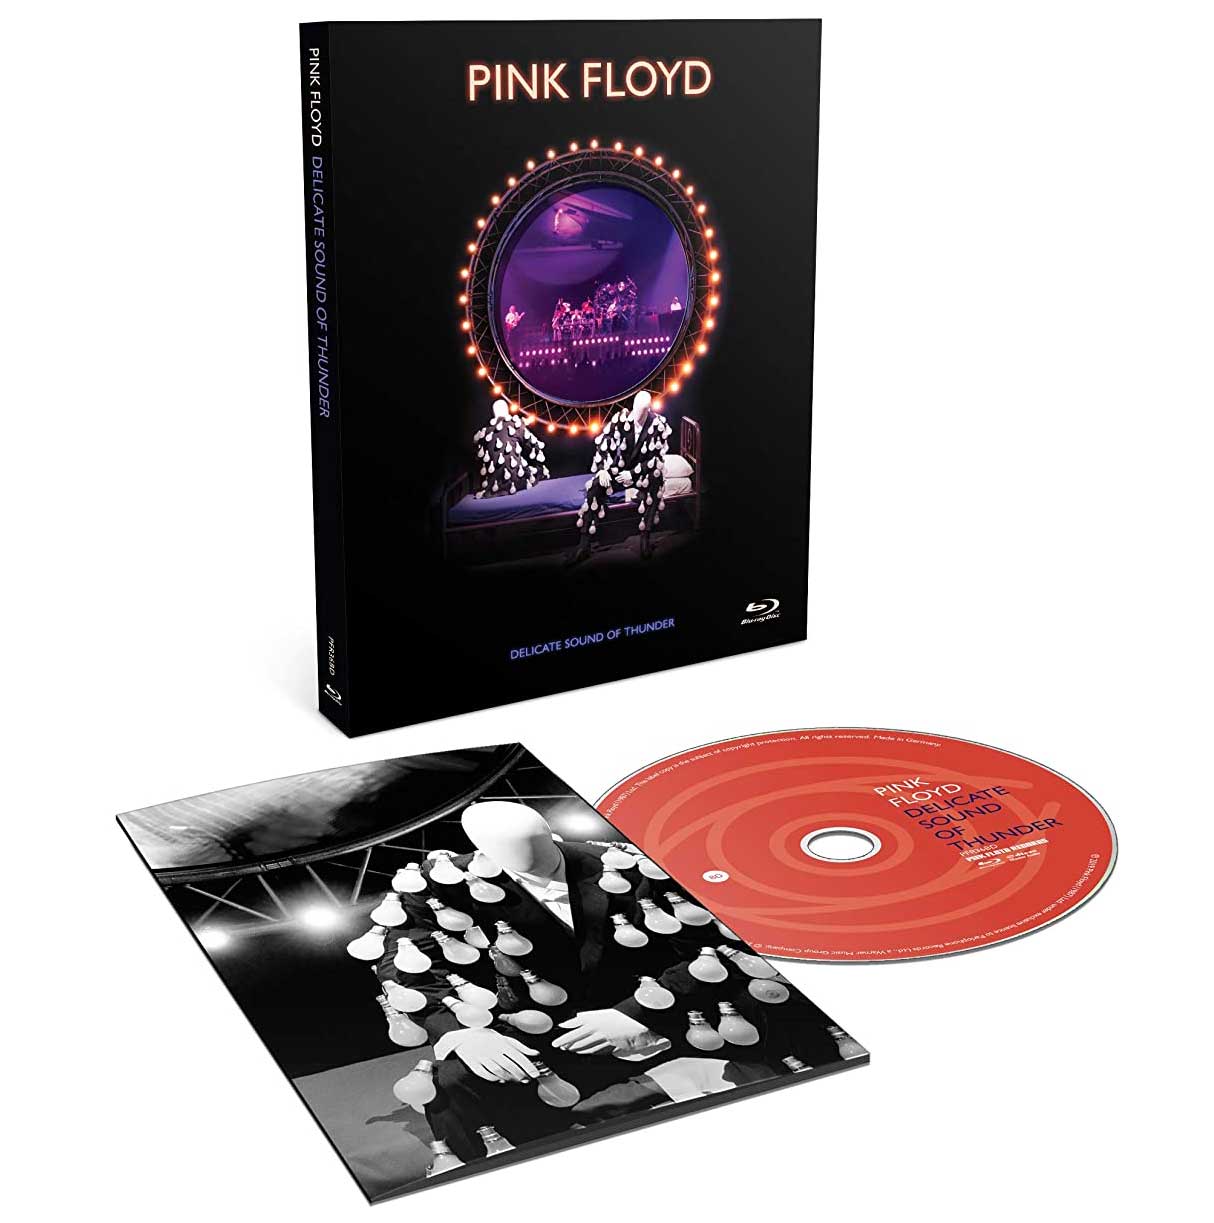 Pink-Floyd-Delicate-Sound-Of-Thunder-Blu-ray